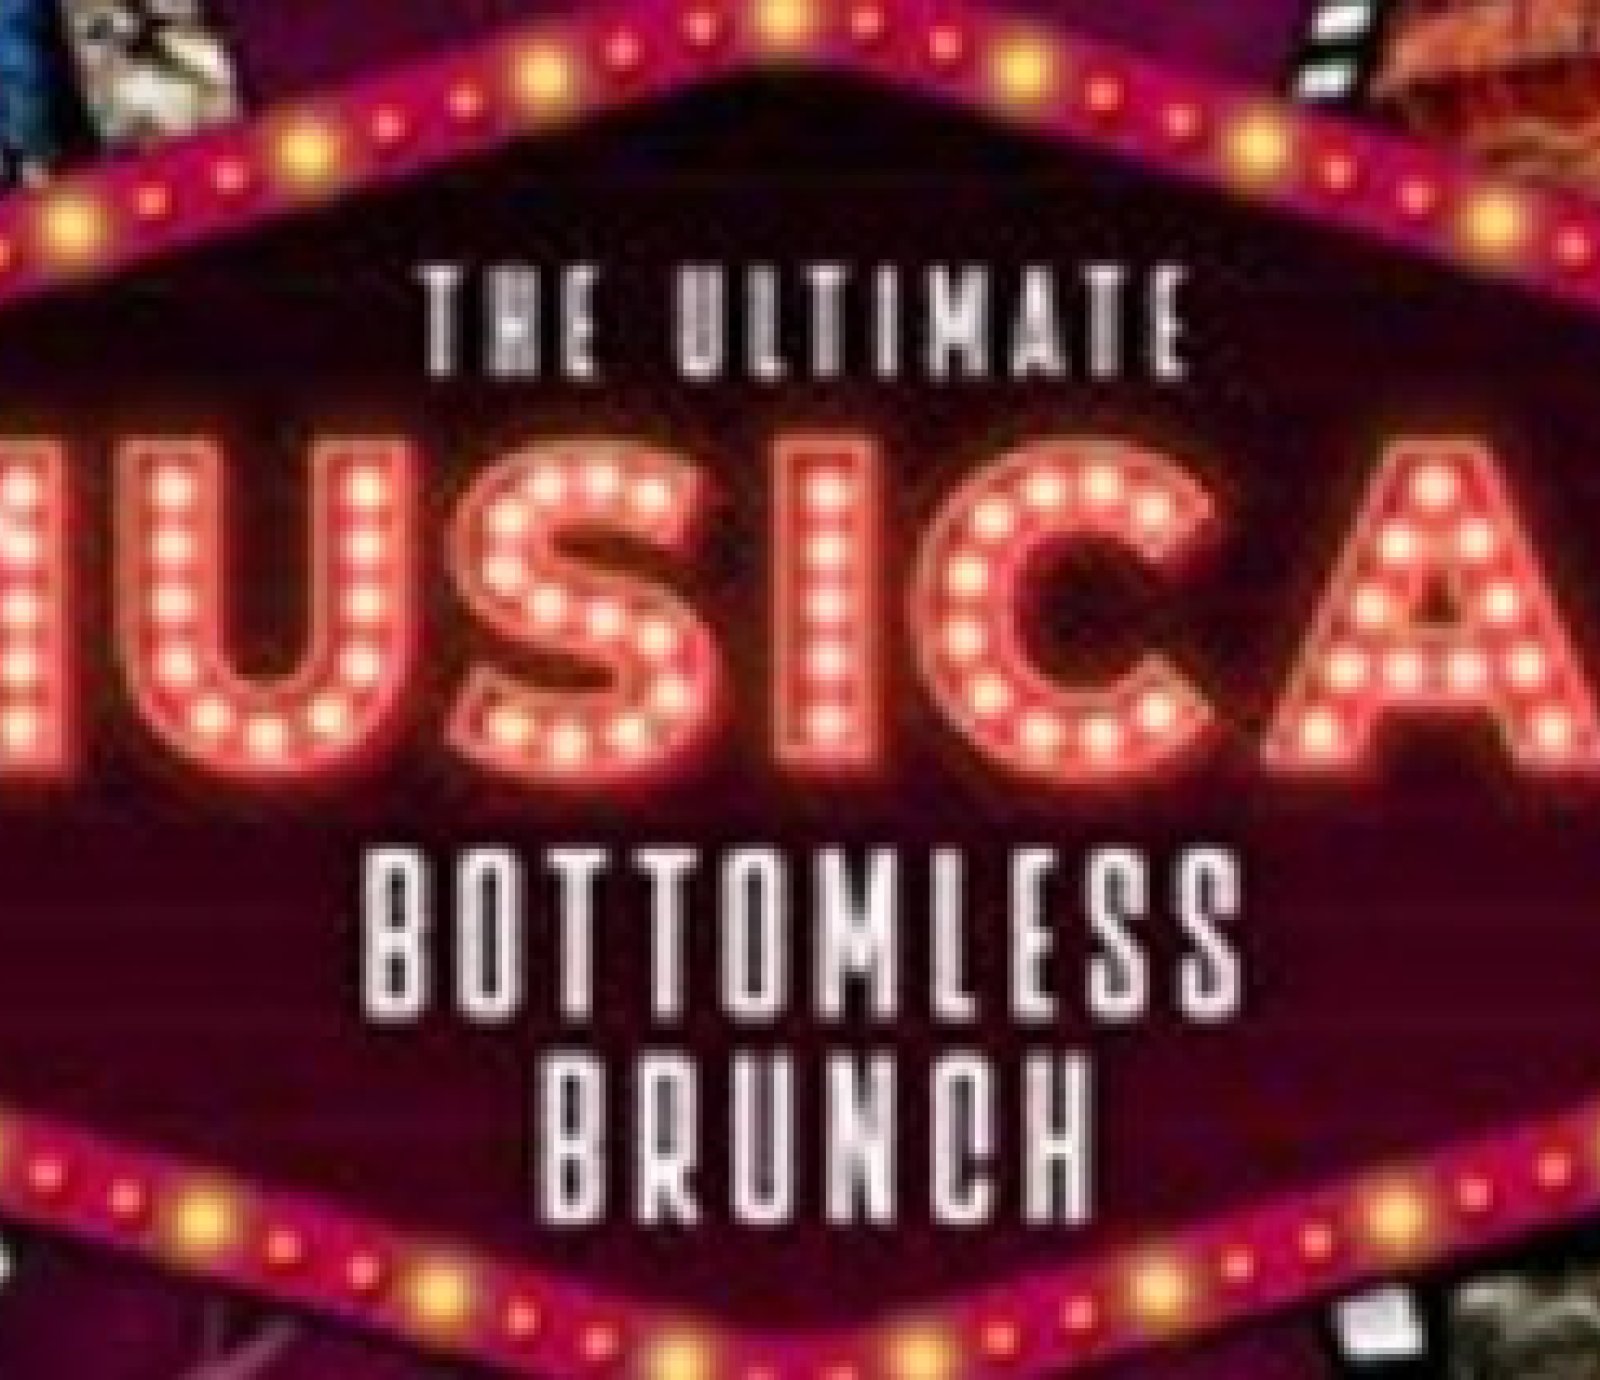 The Ultimate Musical Bottomless Brunch